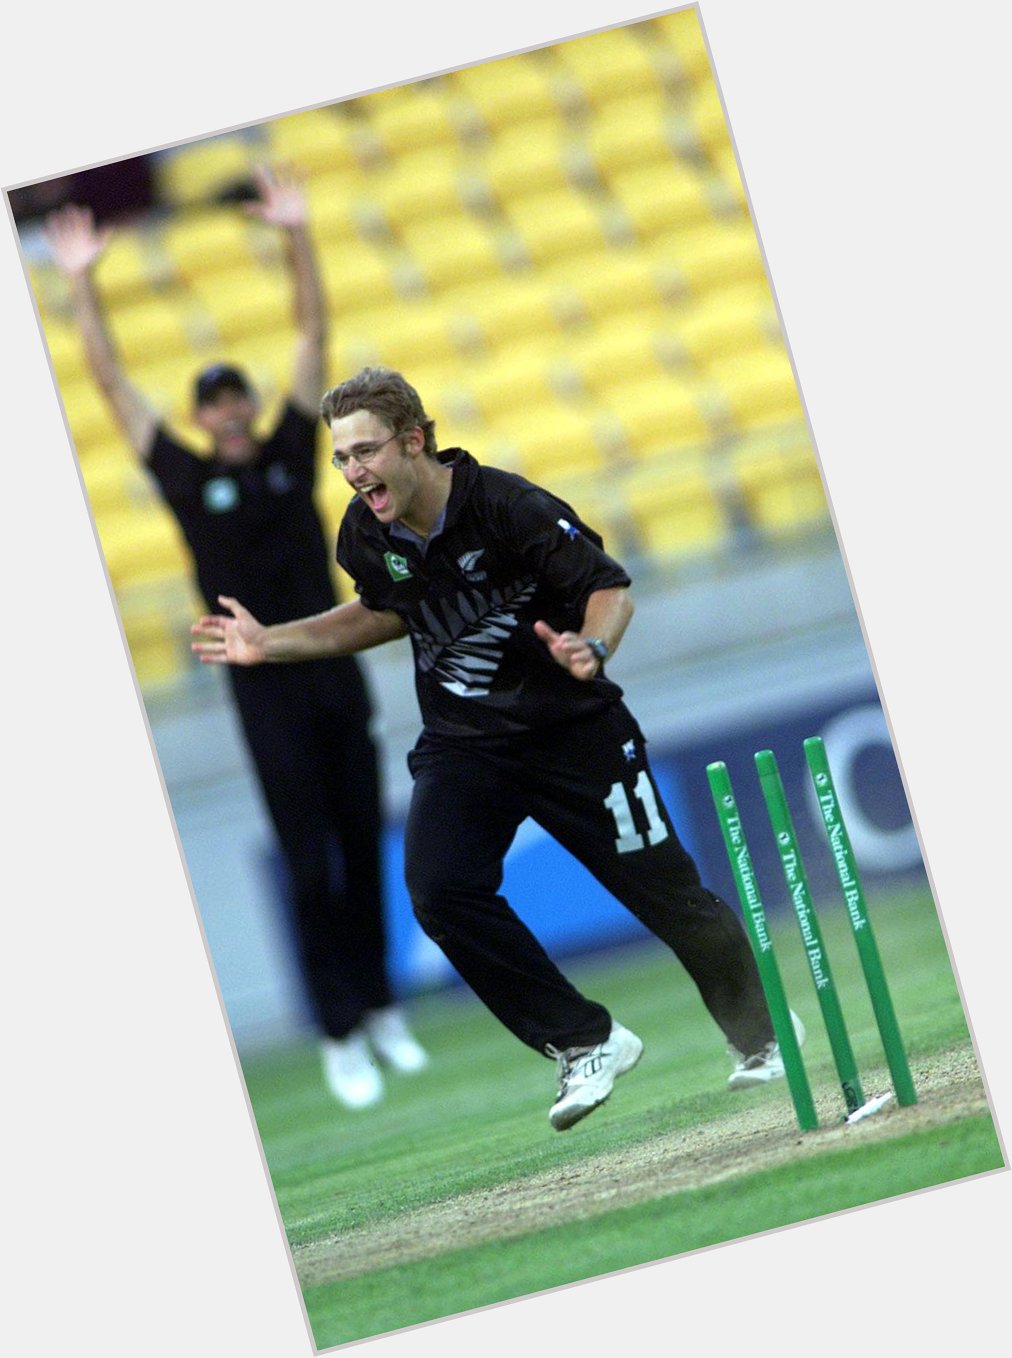 He debuted for the at 18 & now Daniel Vettori turns 36, Happy Birthday! Will he star at 